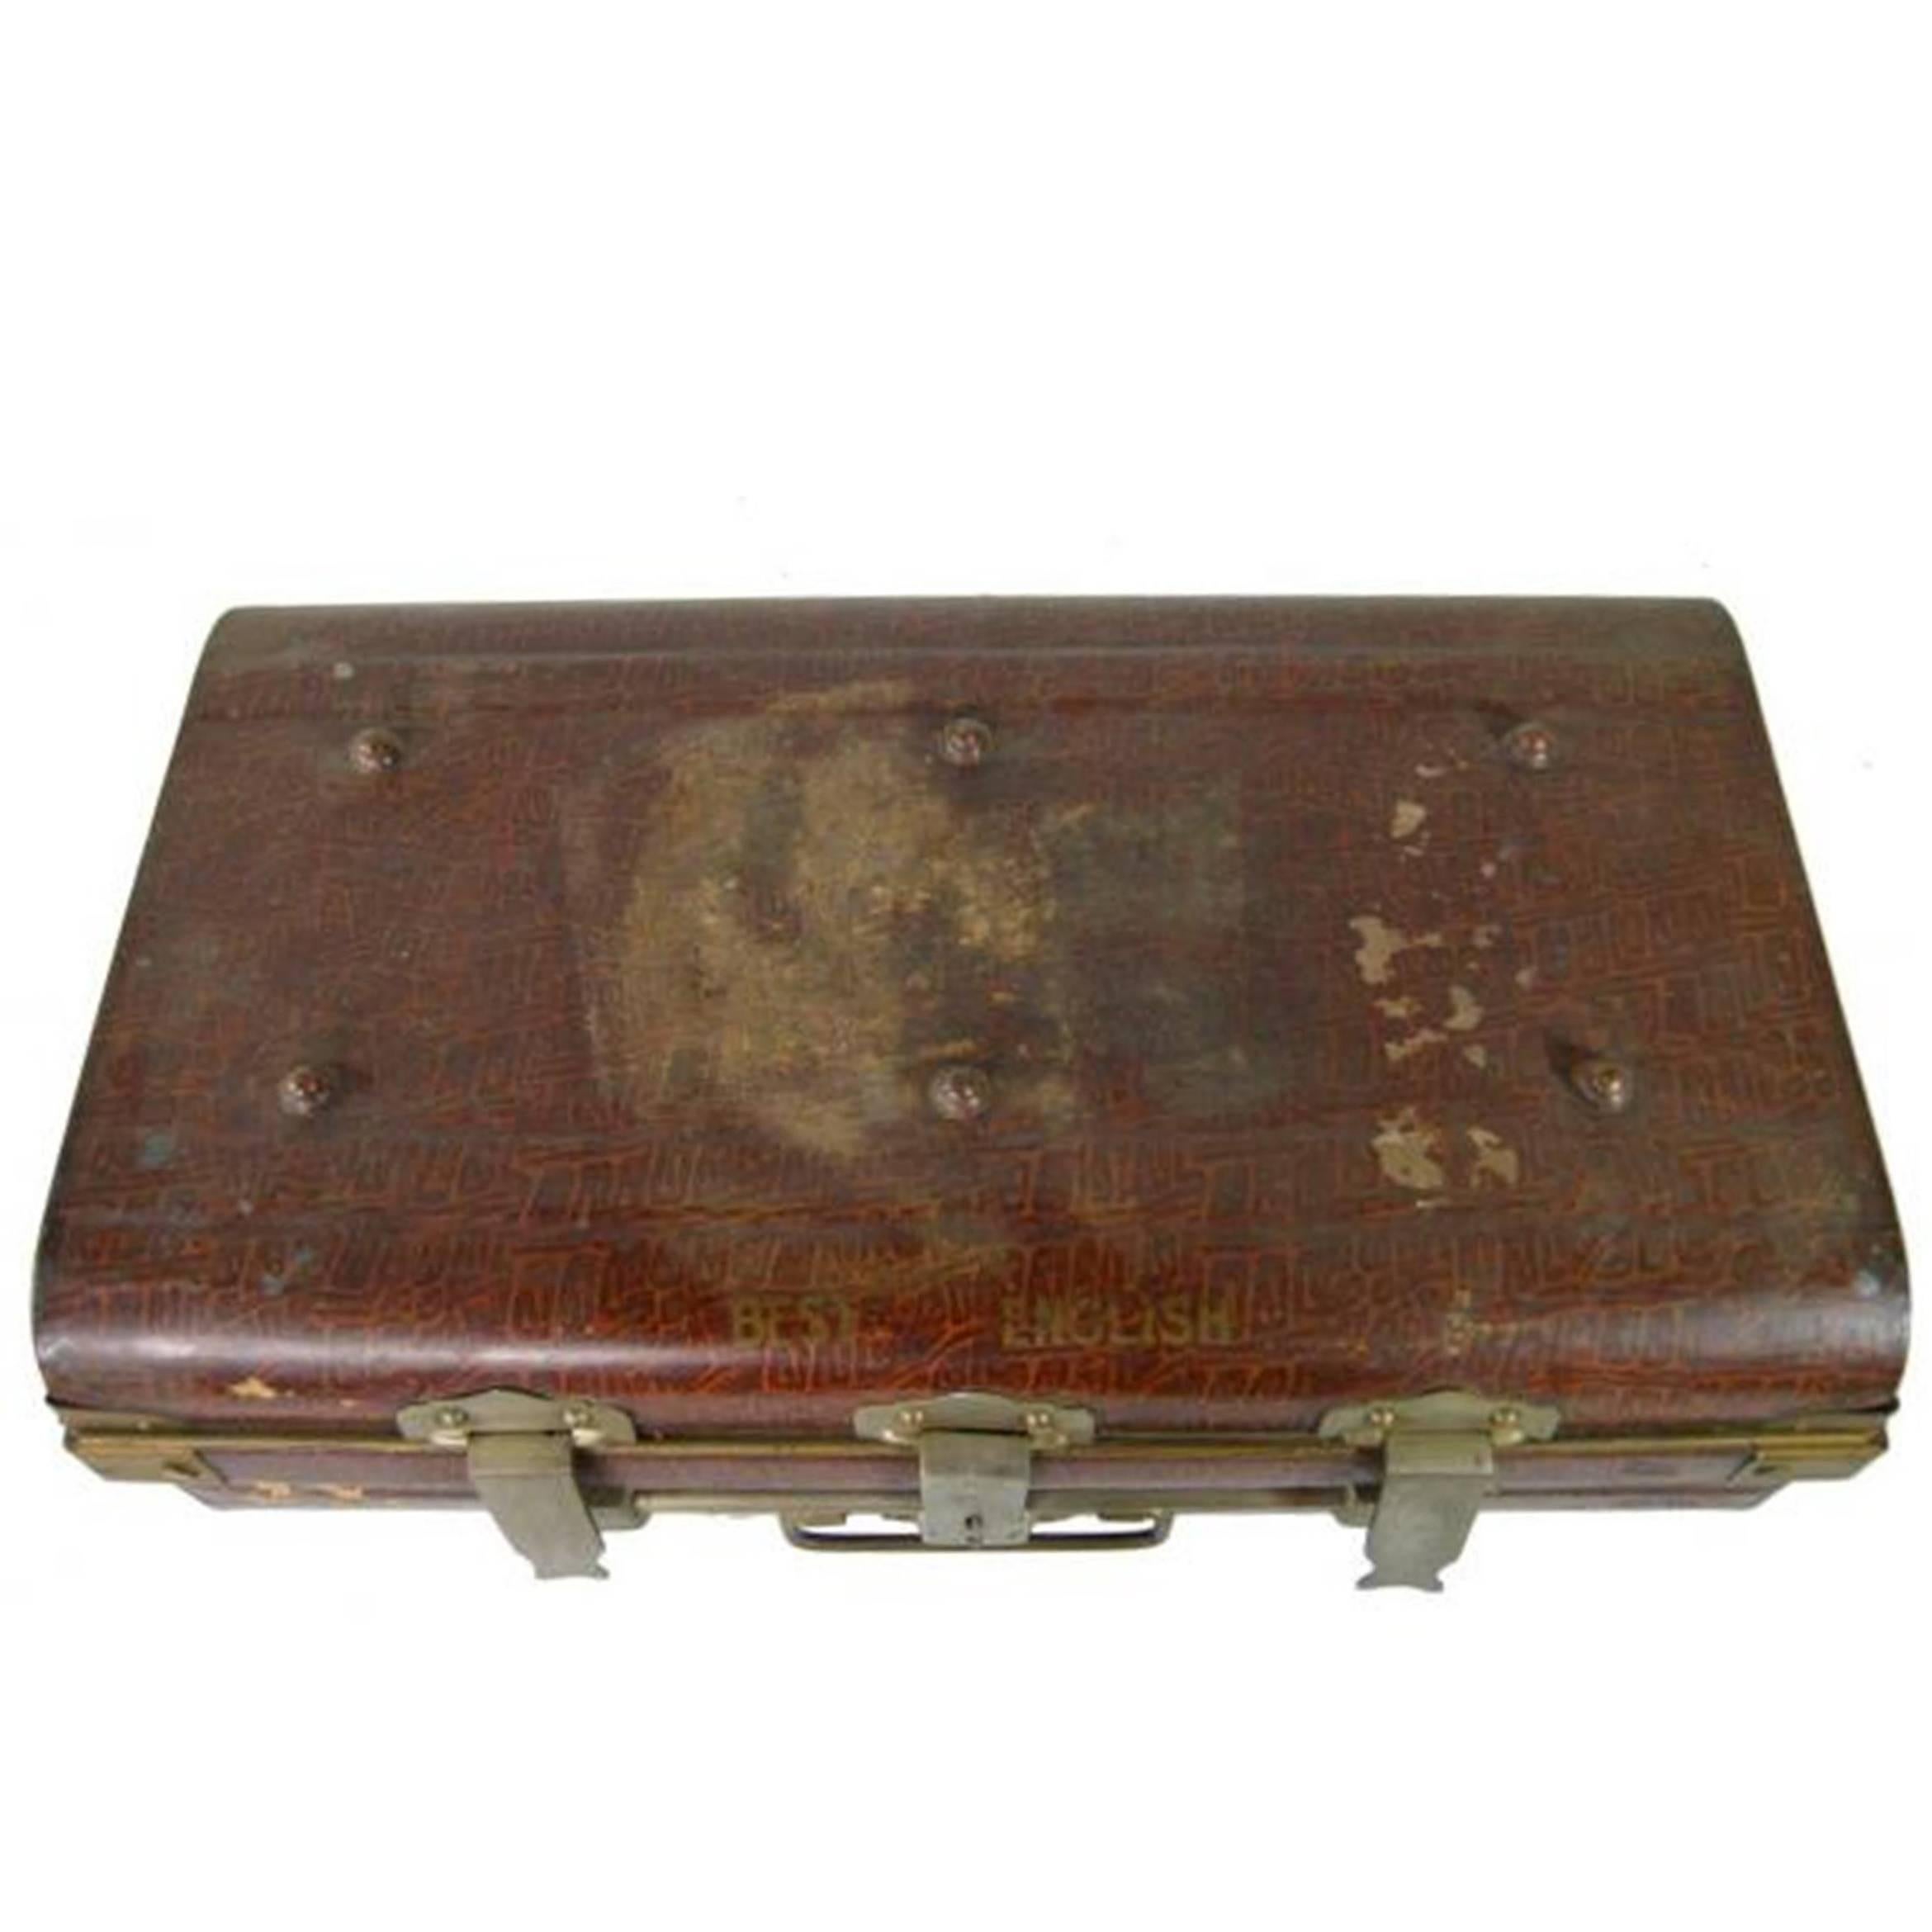 Antique British Wilkes & Son Locked Metal Trunk for Export, circa 1800 For Sale